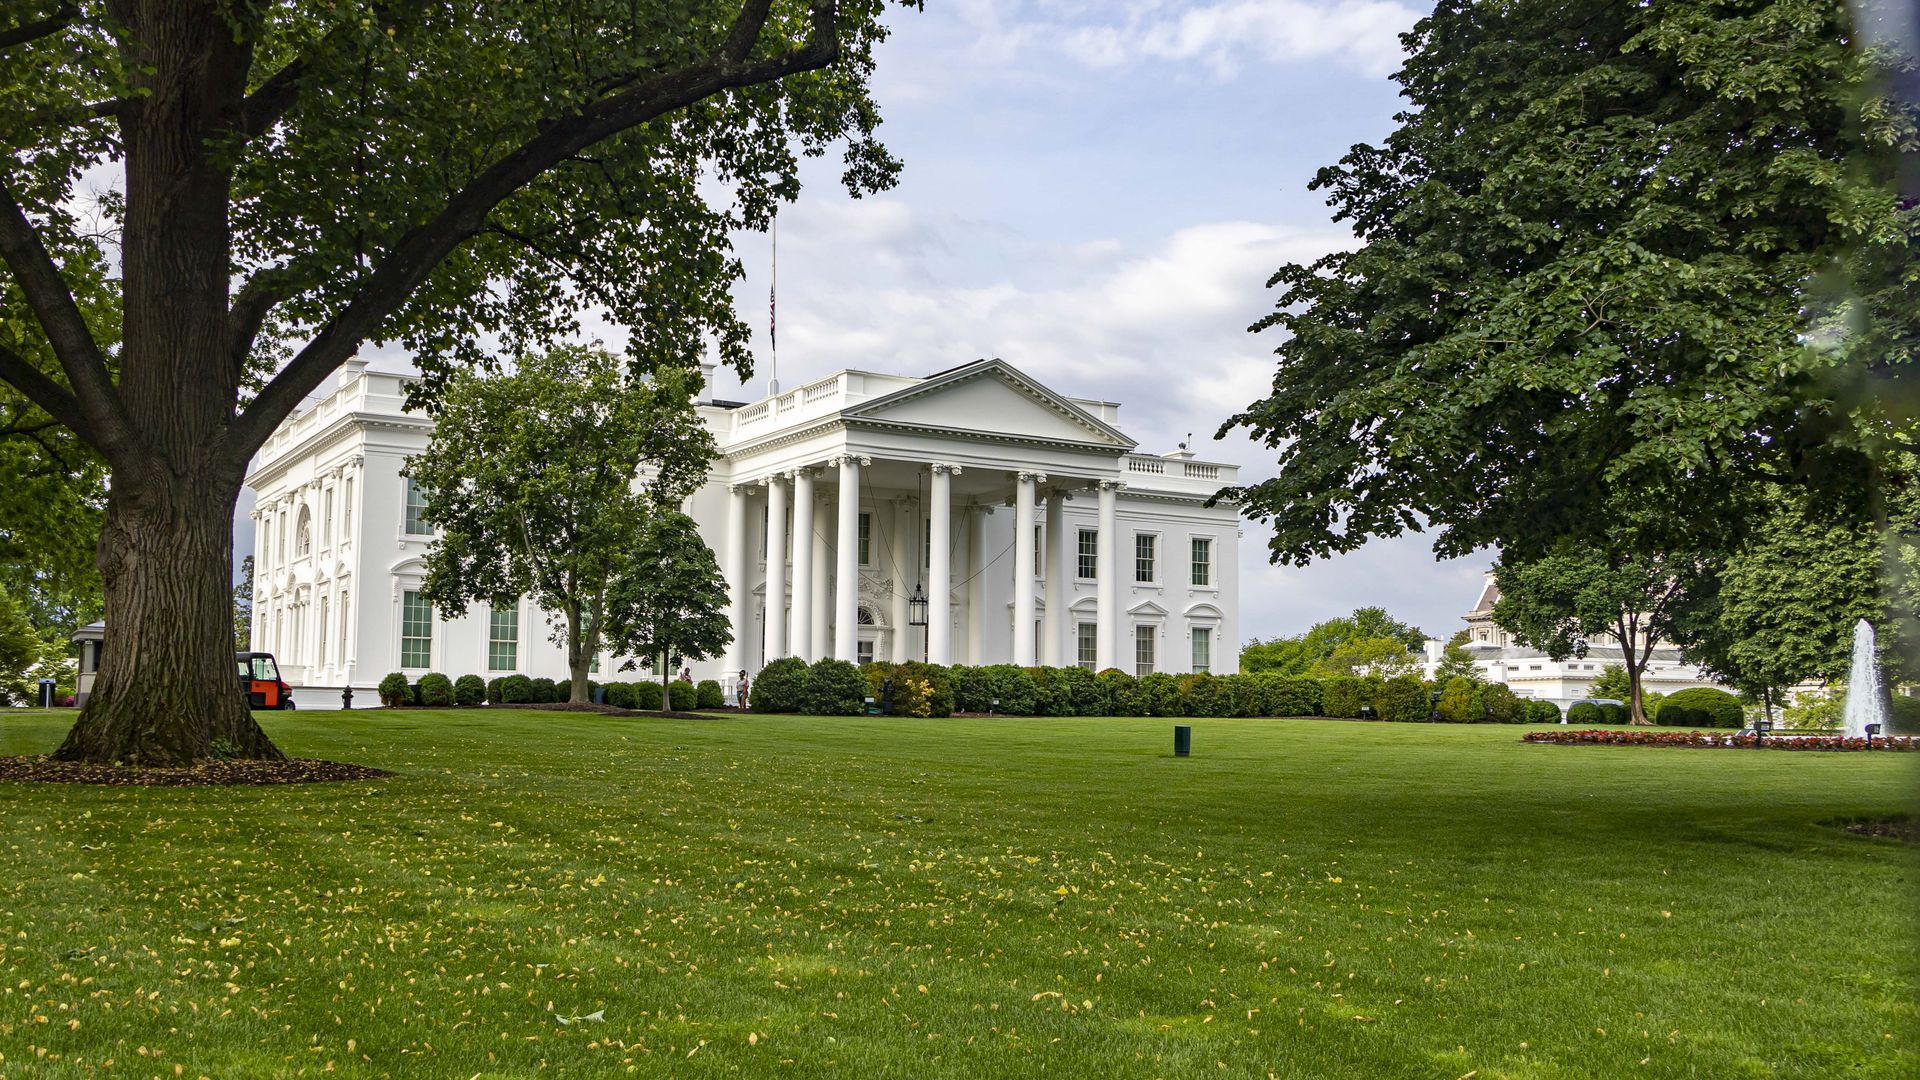 The North Lawn of the White House is pictured.